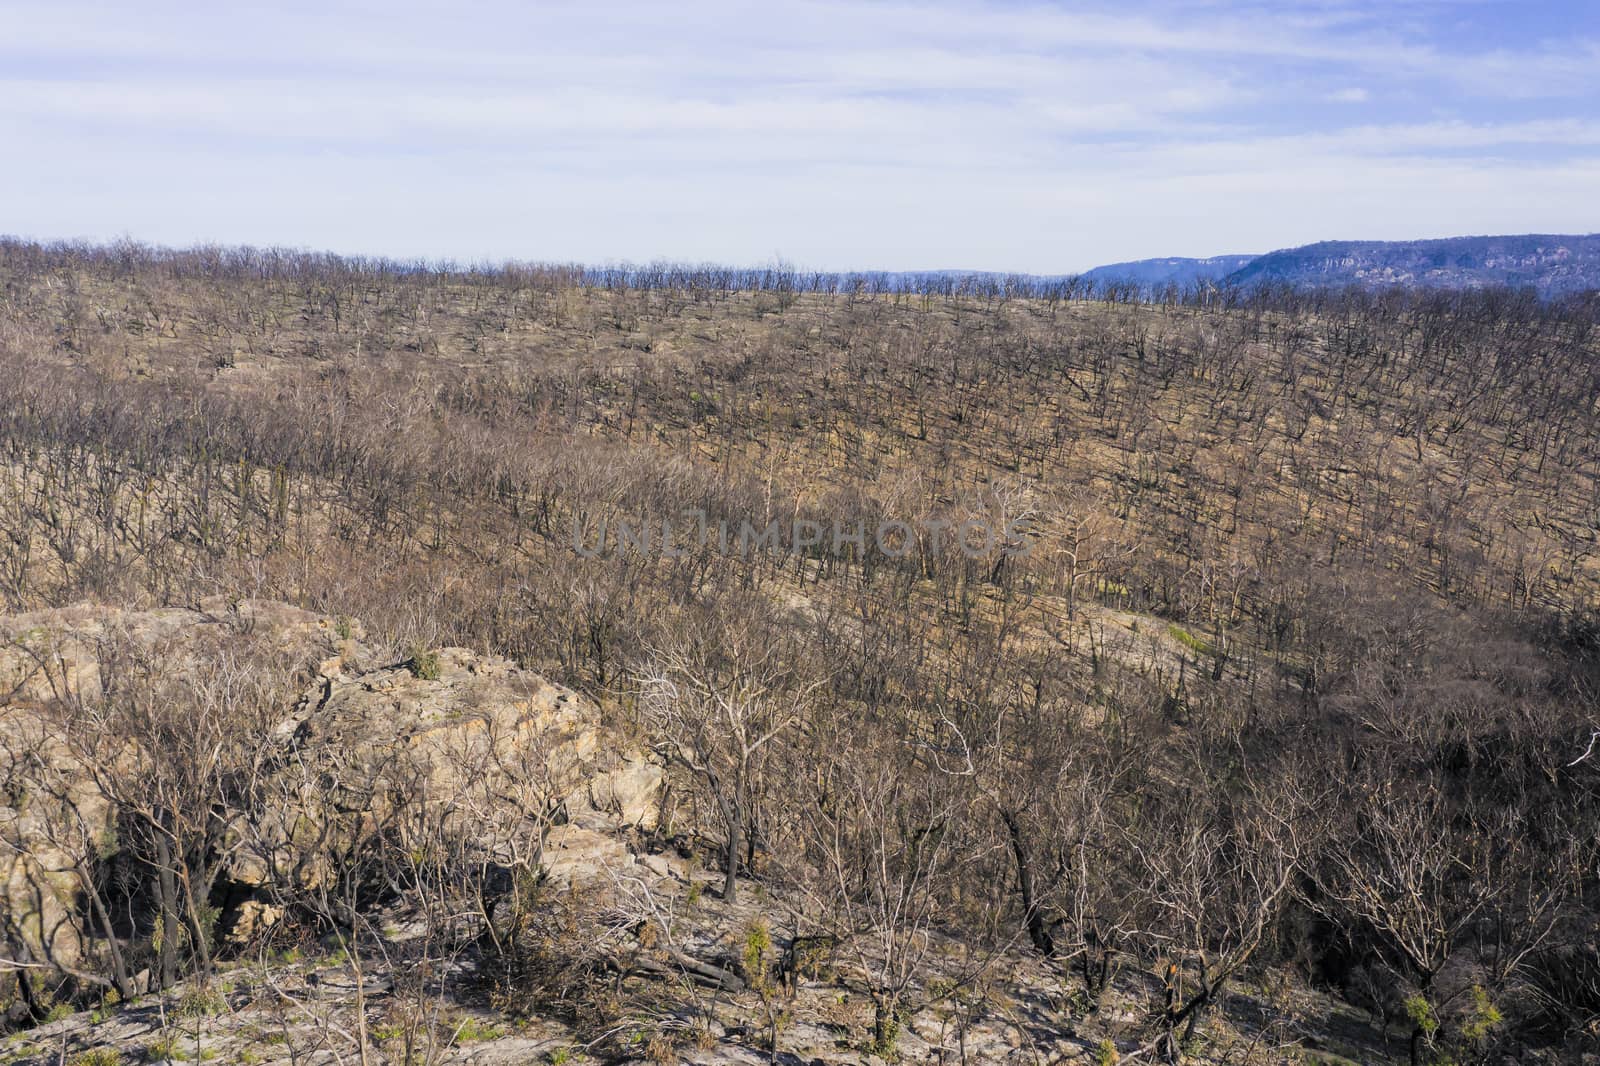 Forest regeneration in The Blue Mountains after the severe bushfires